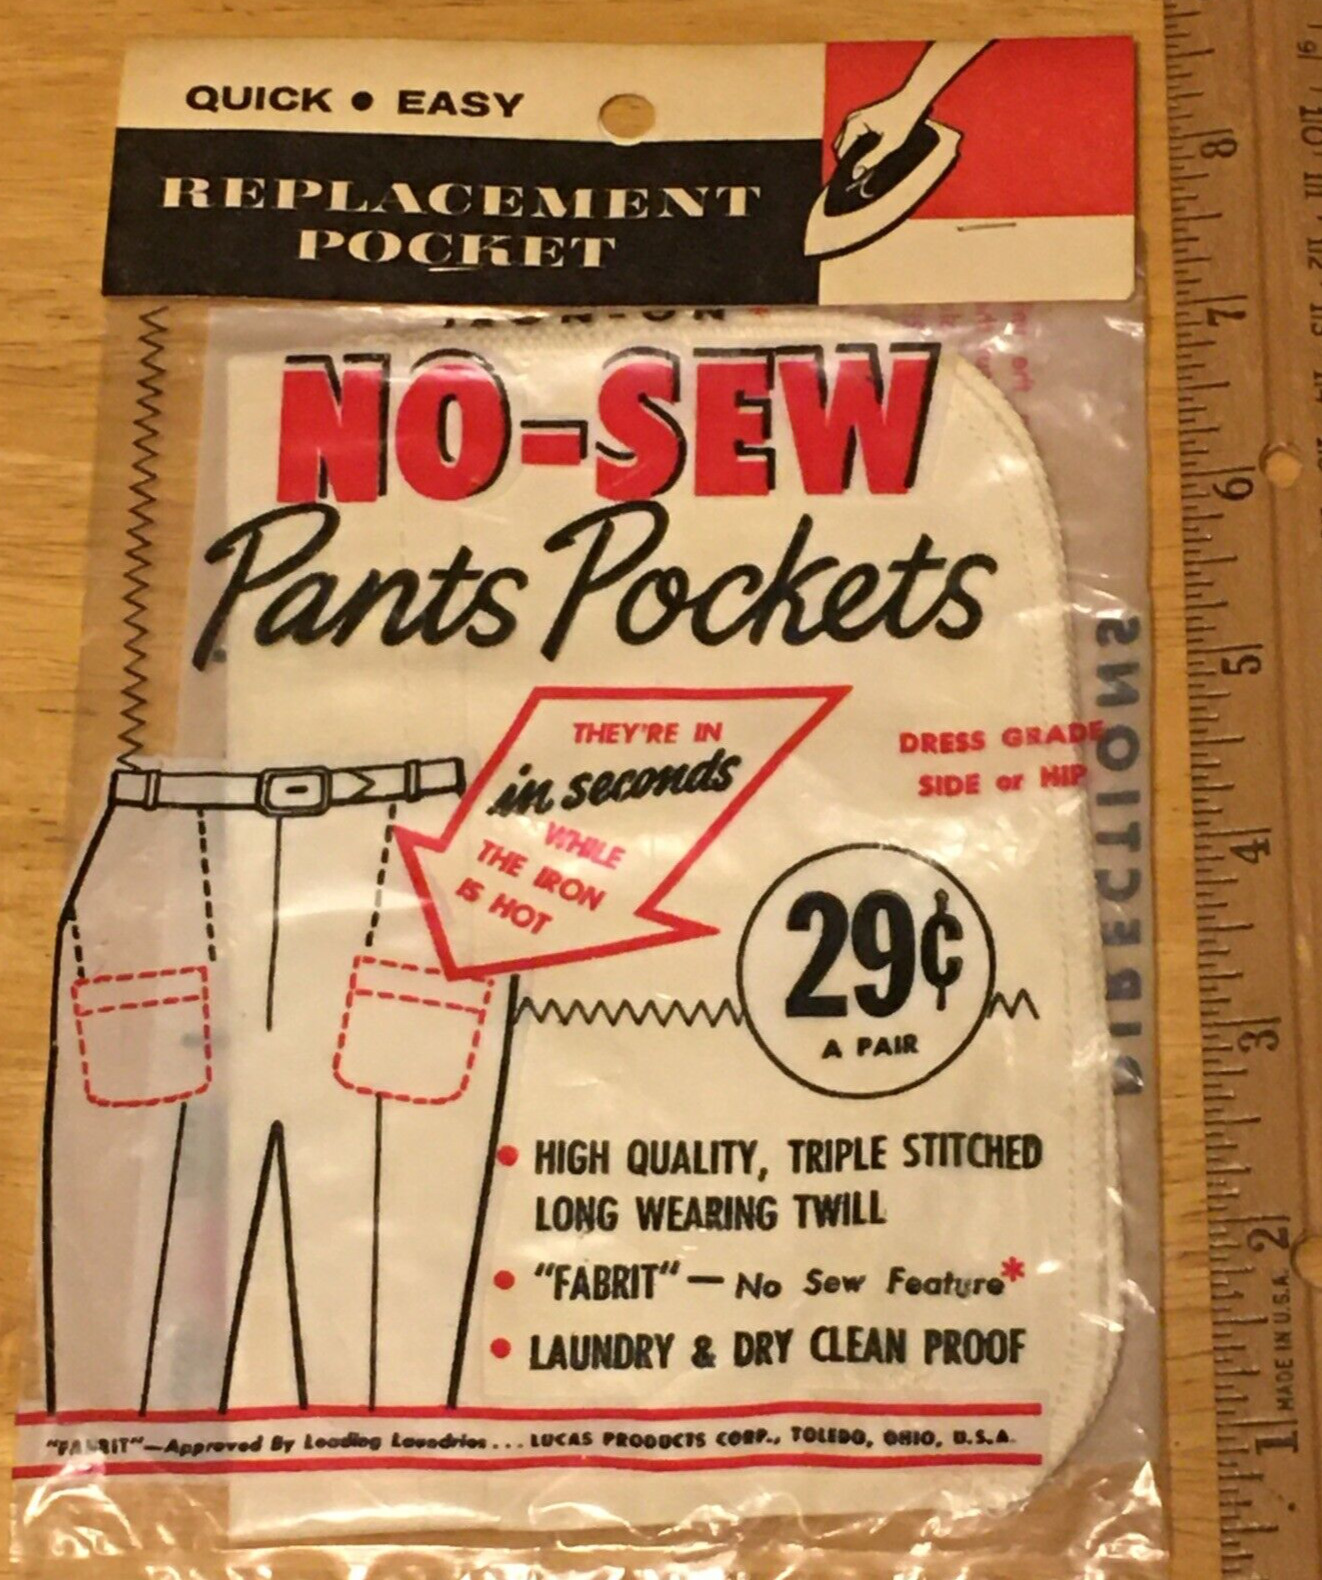 Vintage Lucas Products Corp No-Sew Pants Pockets. NOS - 